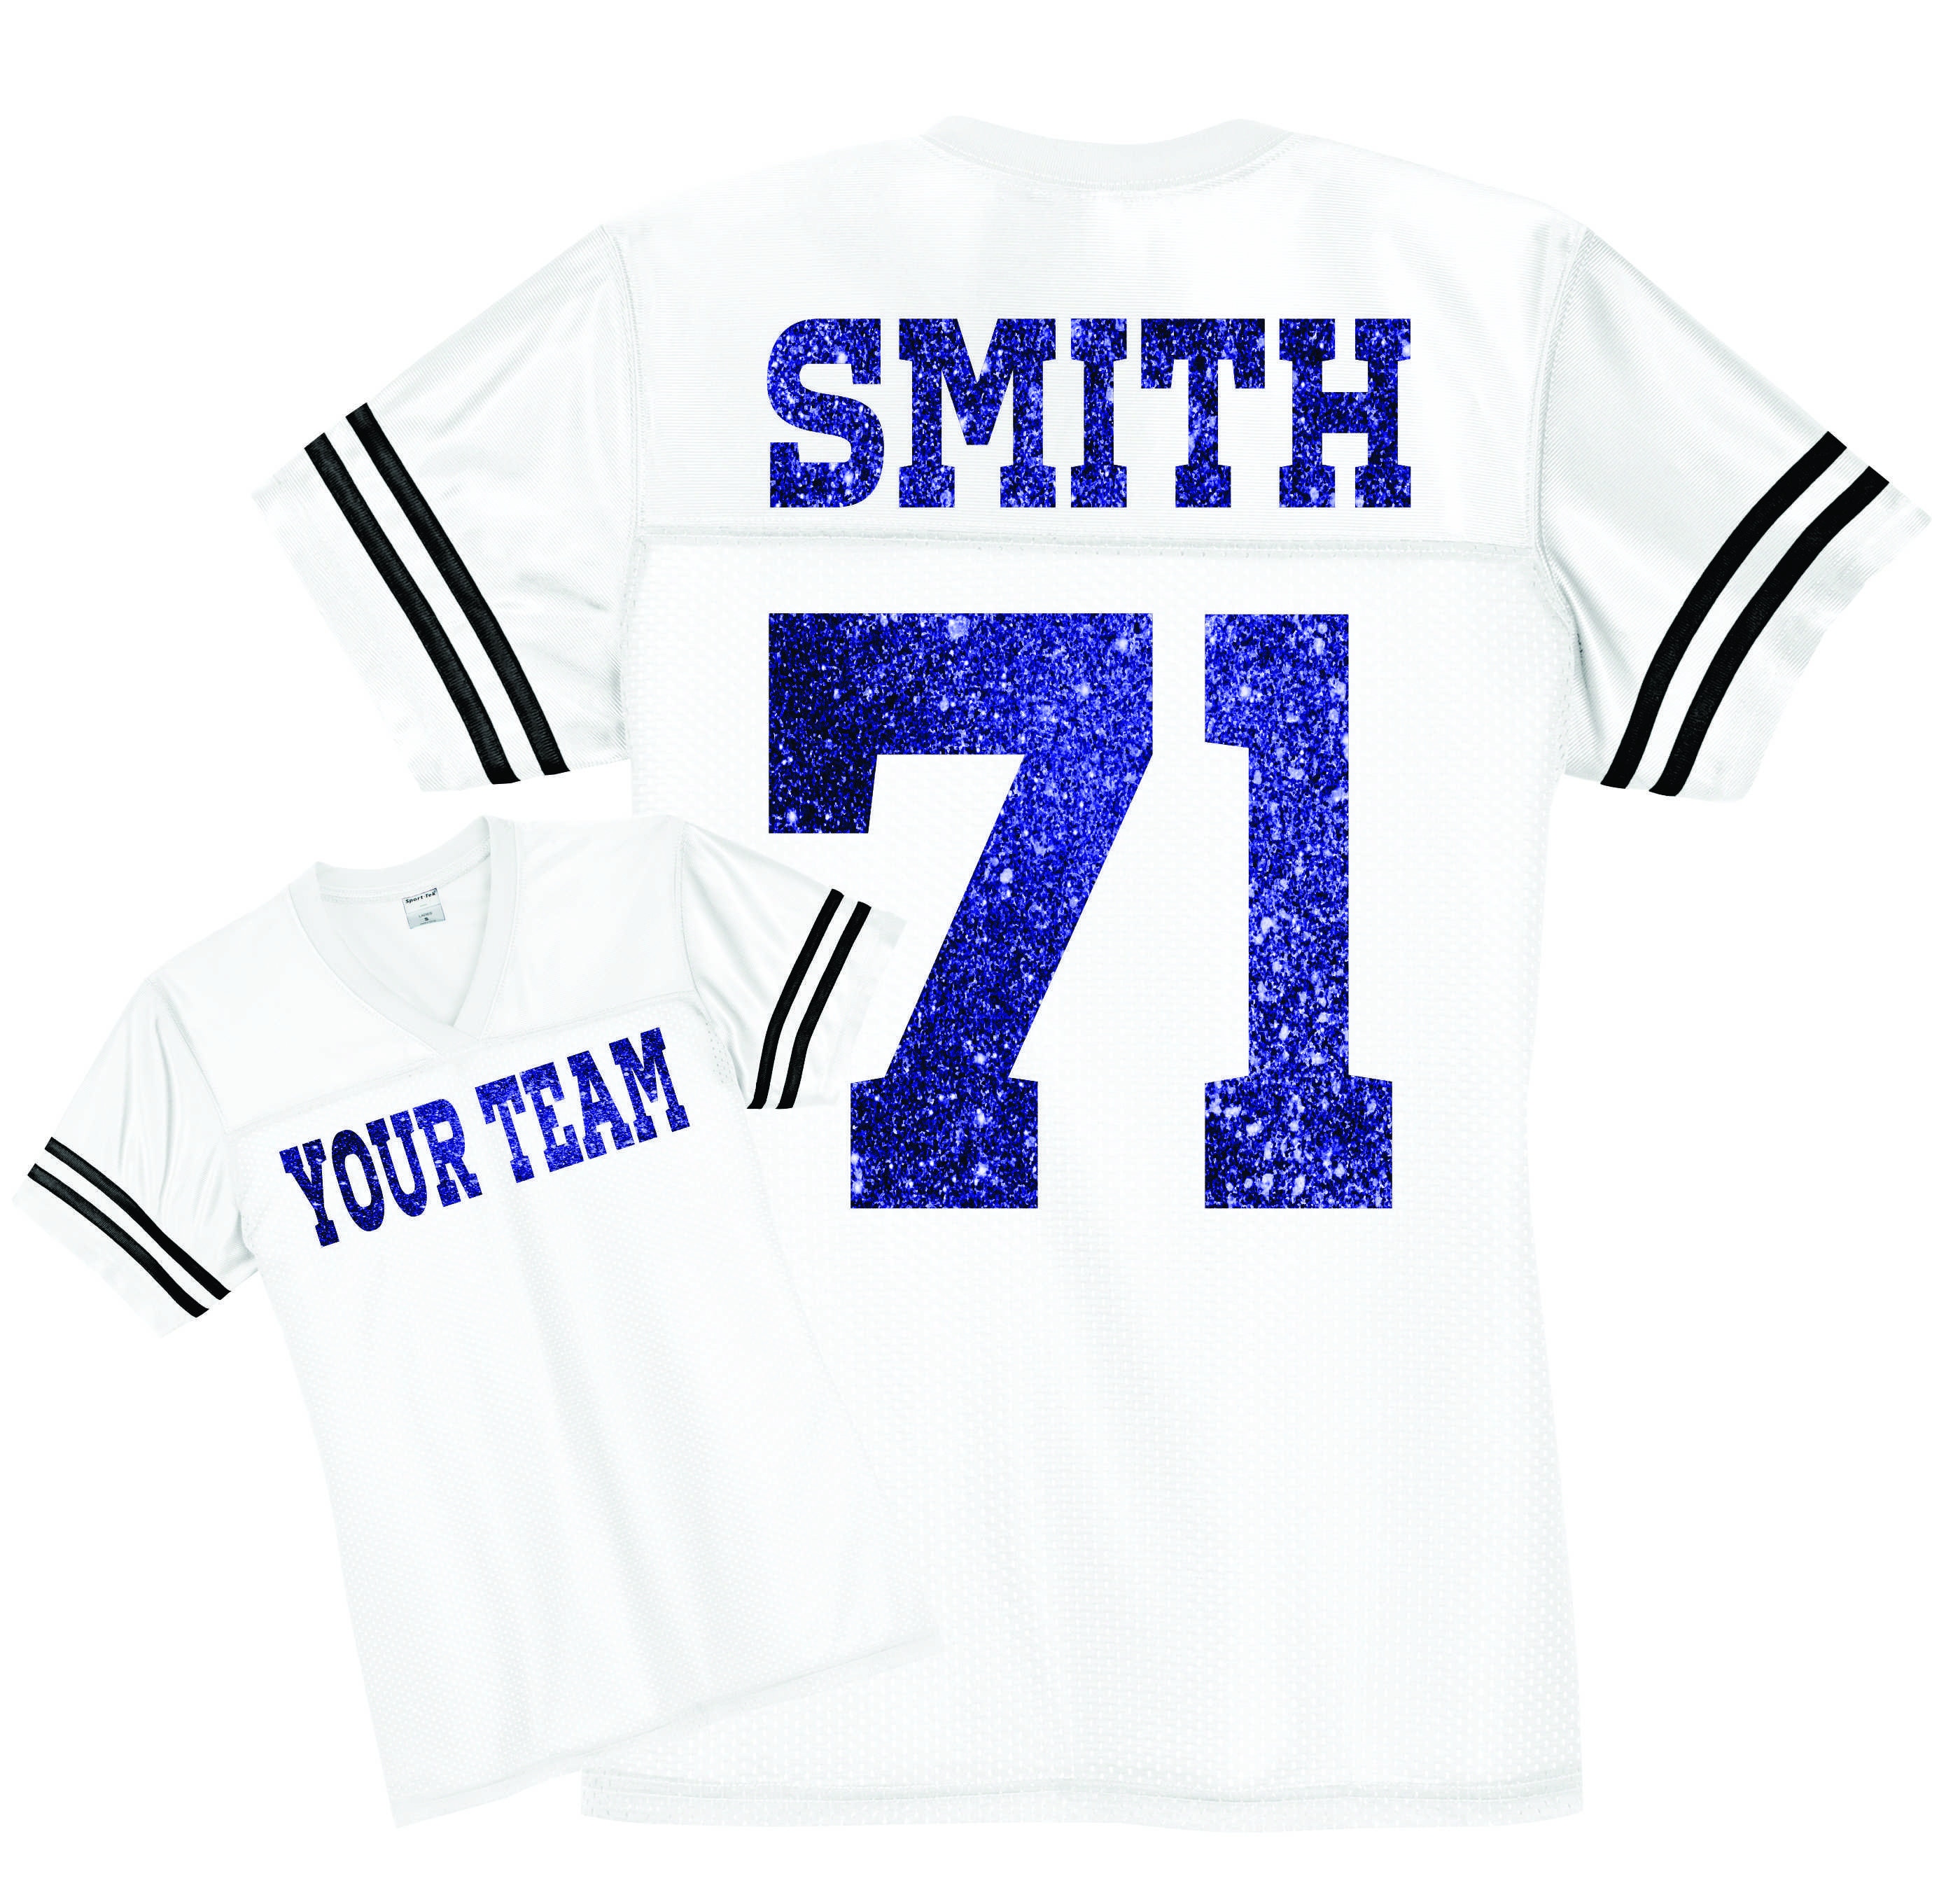 CUSTOM Women's Football Jersey ANY Color Personalized GLITTER Numbers Name  & Team